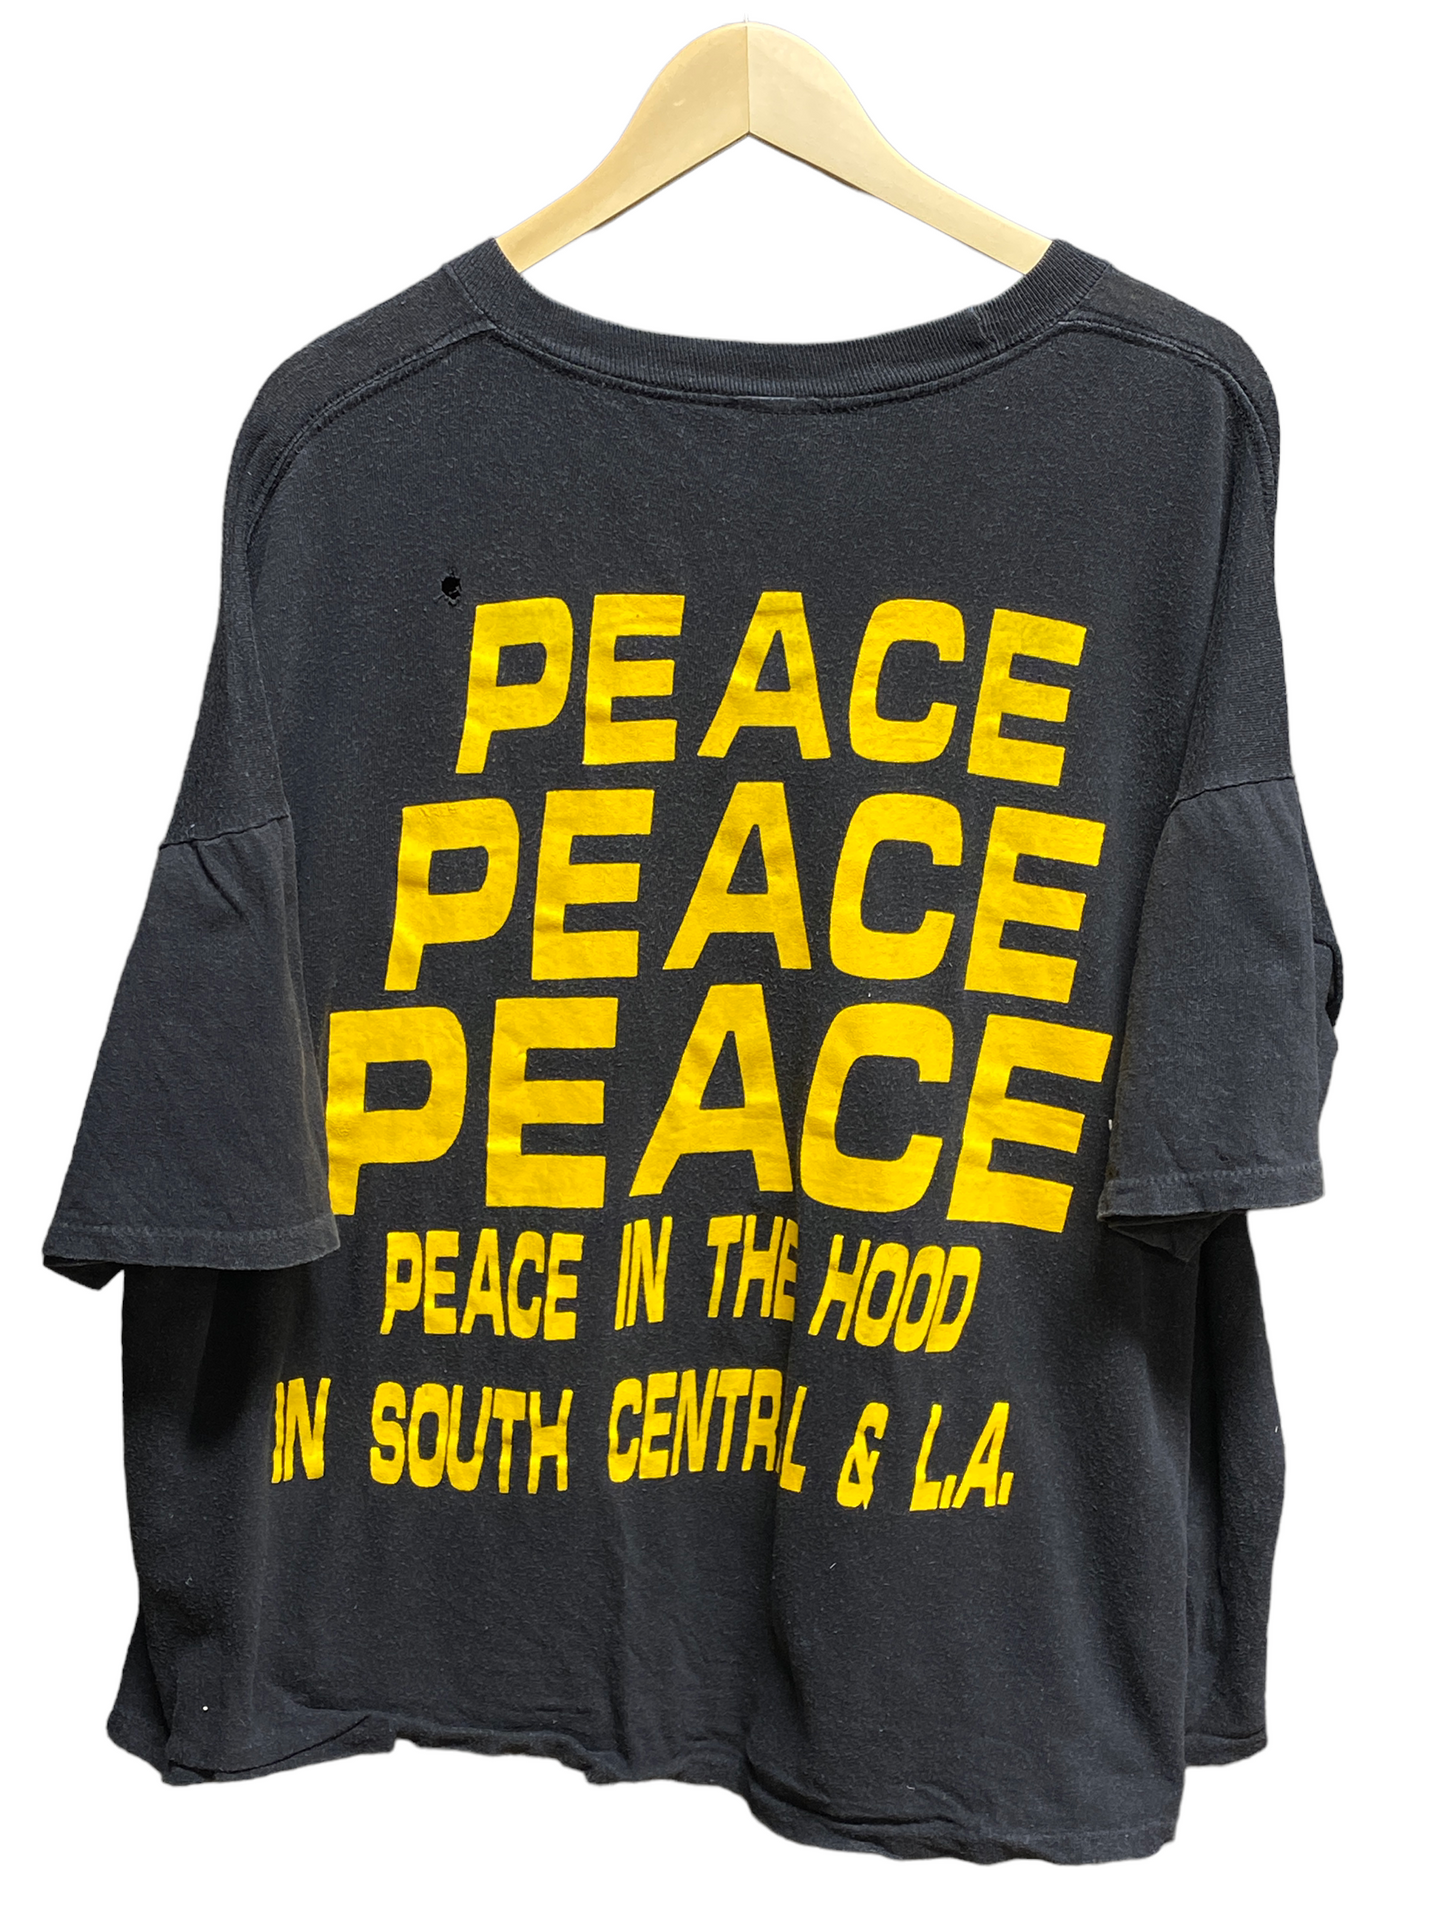 Vintage 80's Peace Now in the Hood South Central LA Tee Size XL